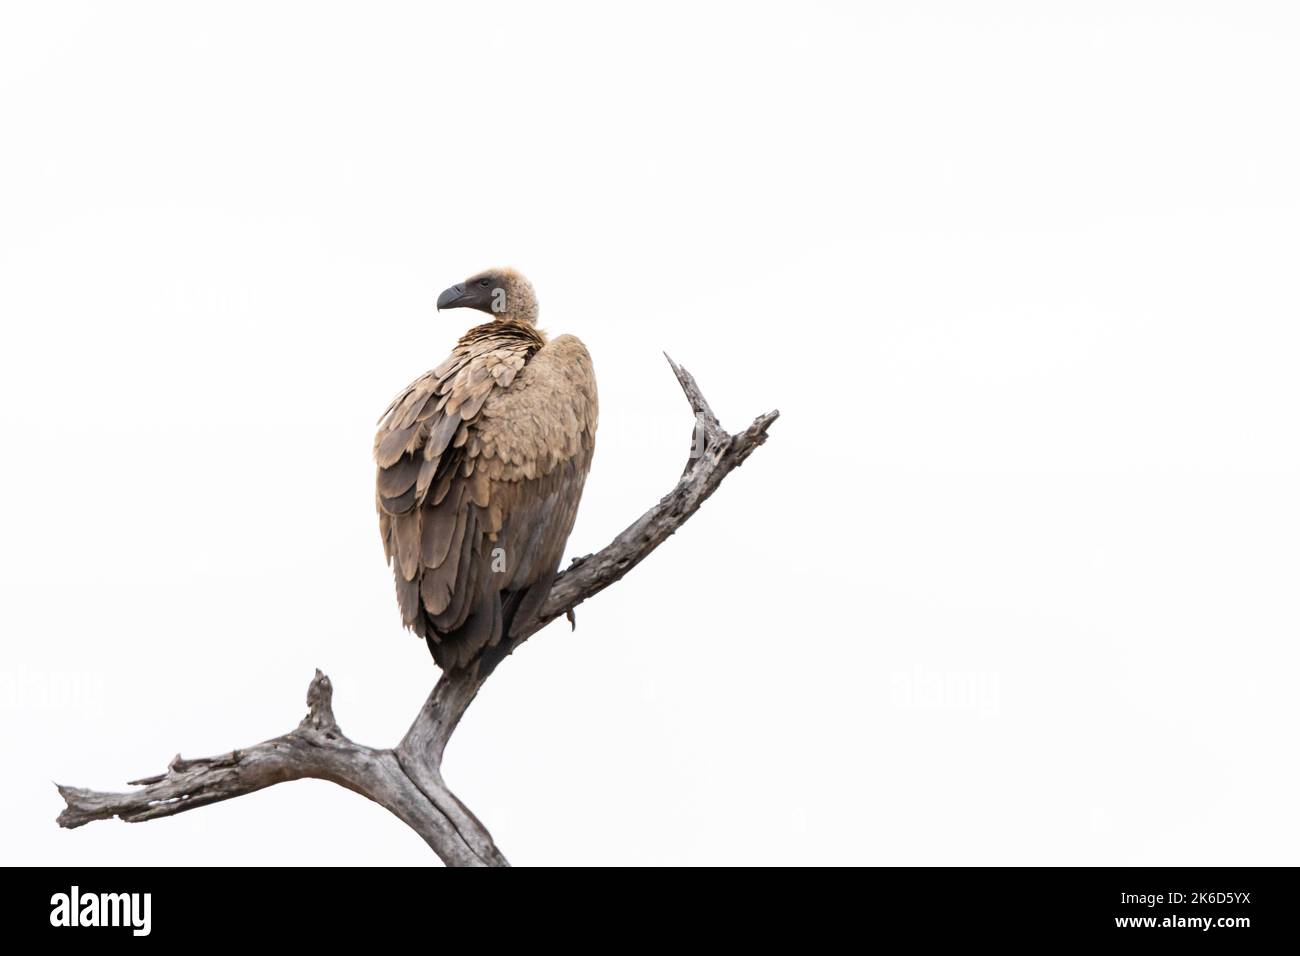 A Cape Vulture on a branch, with negative space prominent in the image Stock Photo